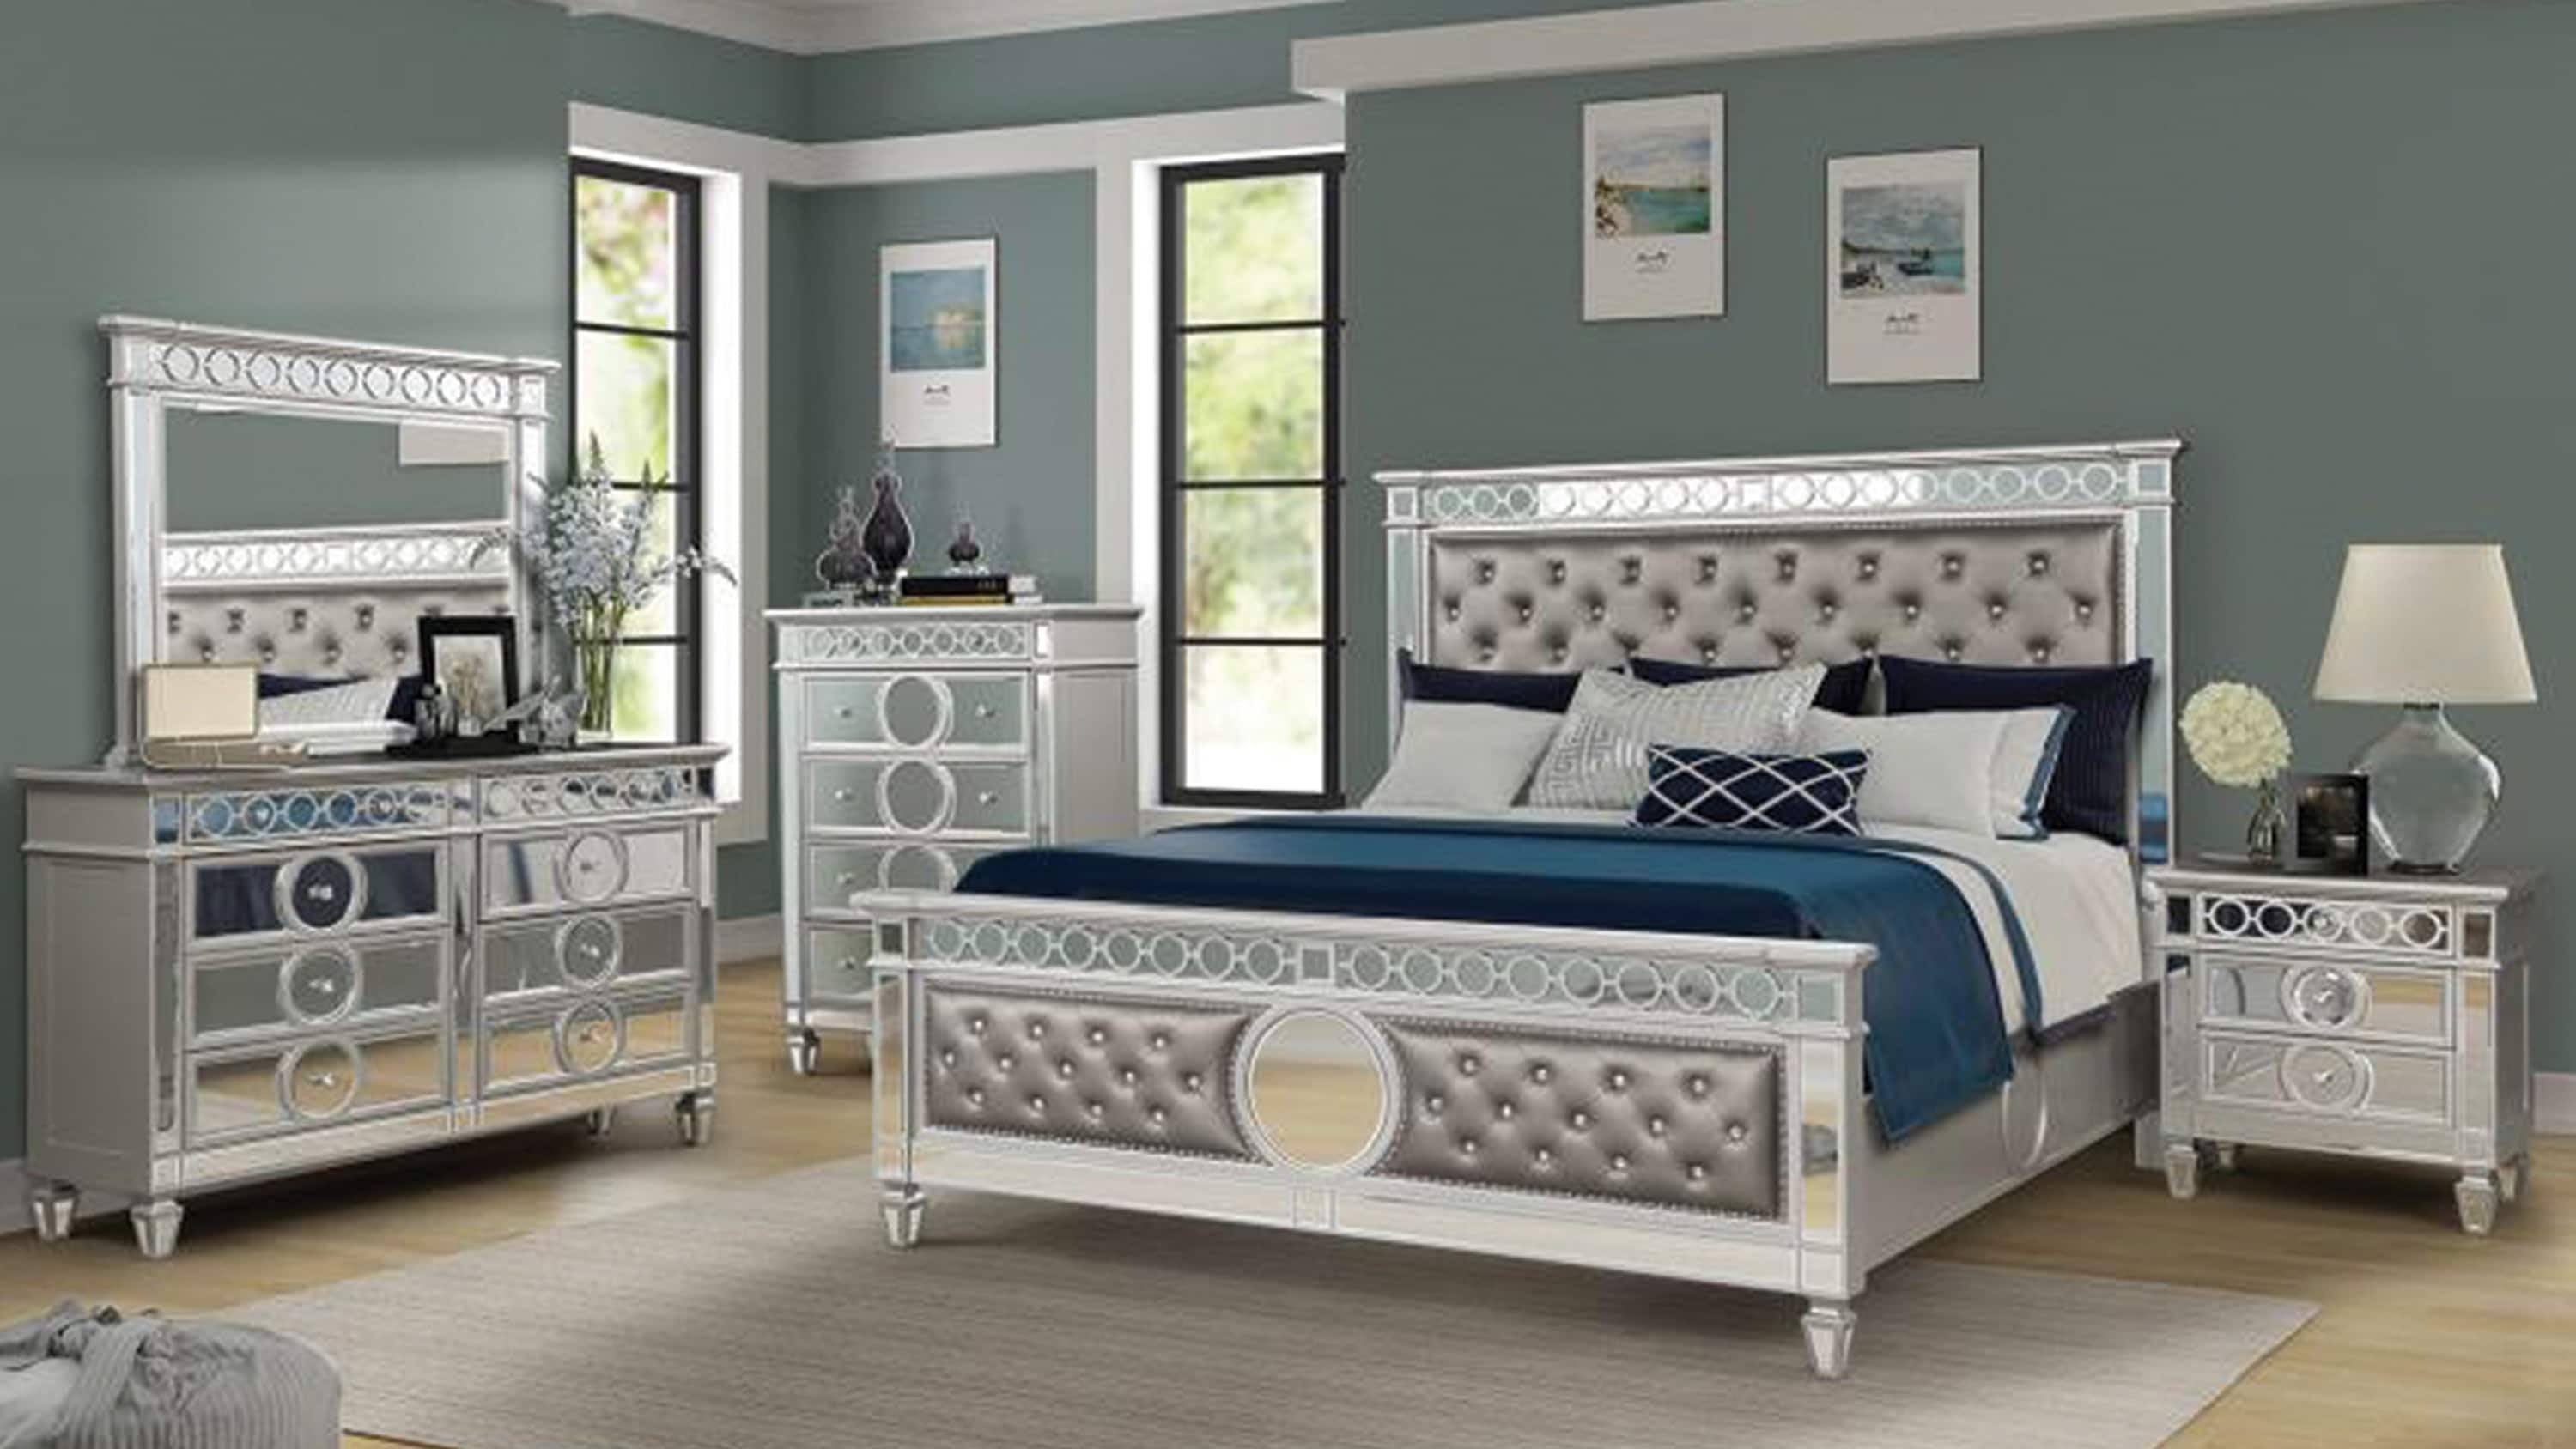 Symphony Mirror Front Queen Bedroom Set in Grey Mirrored Finish | Image